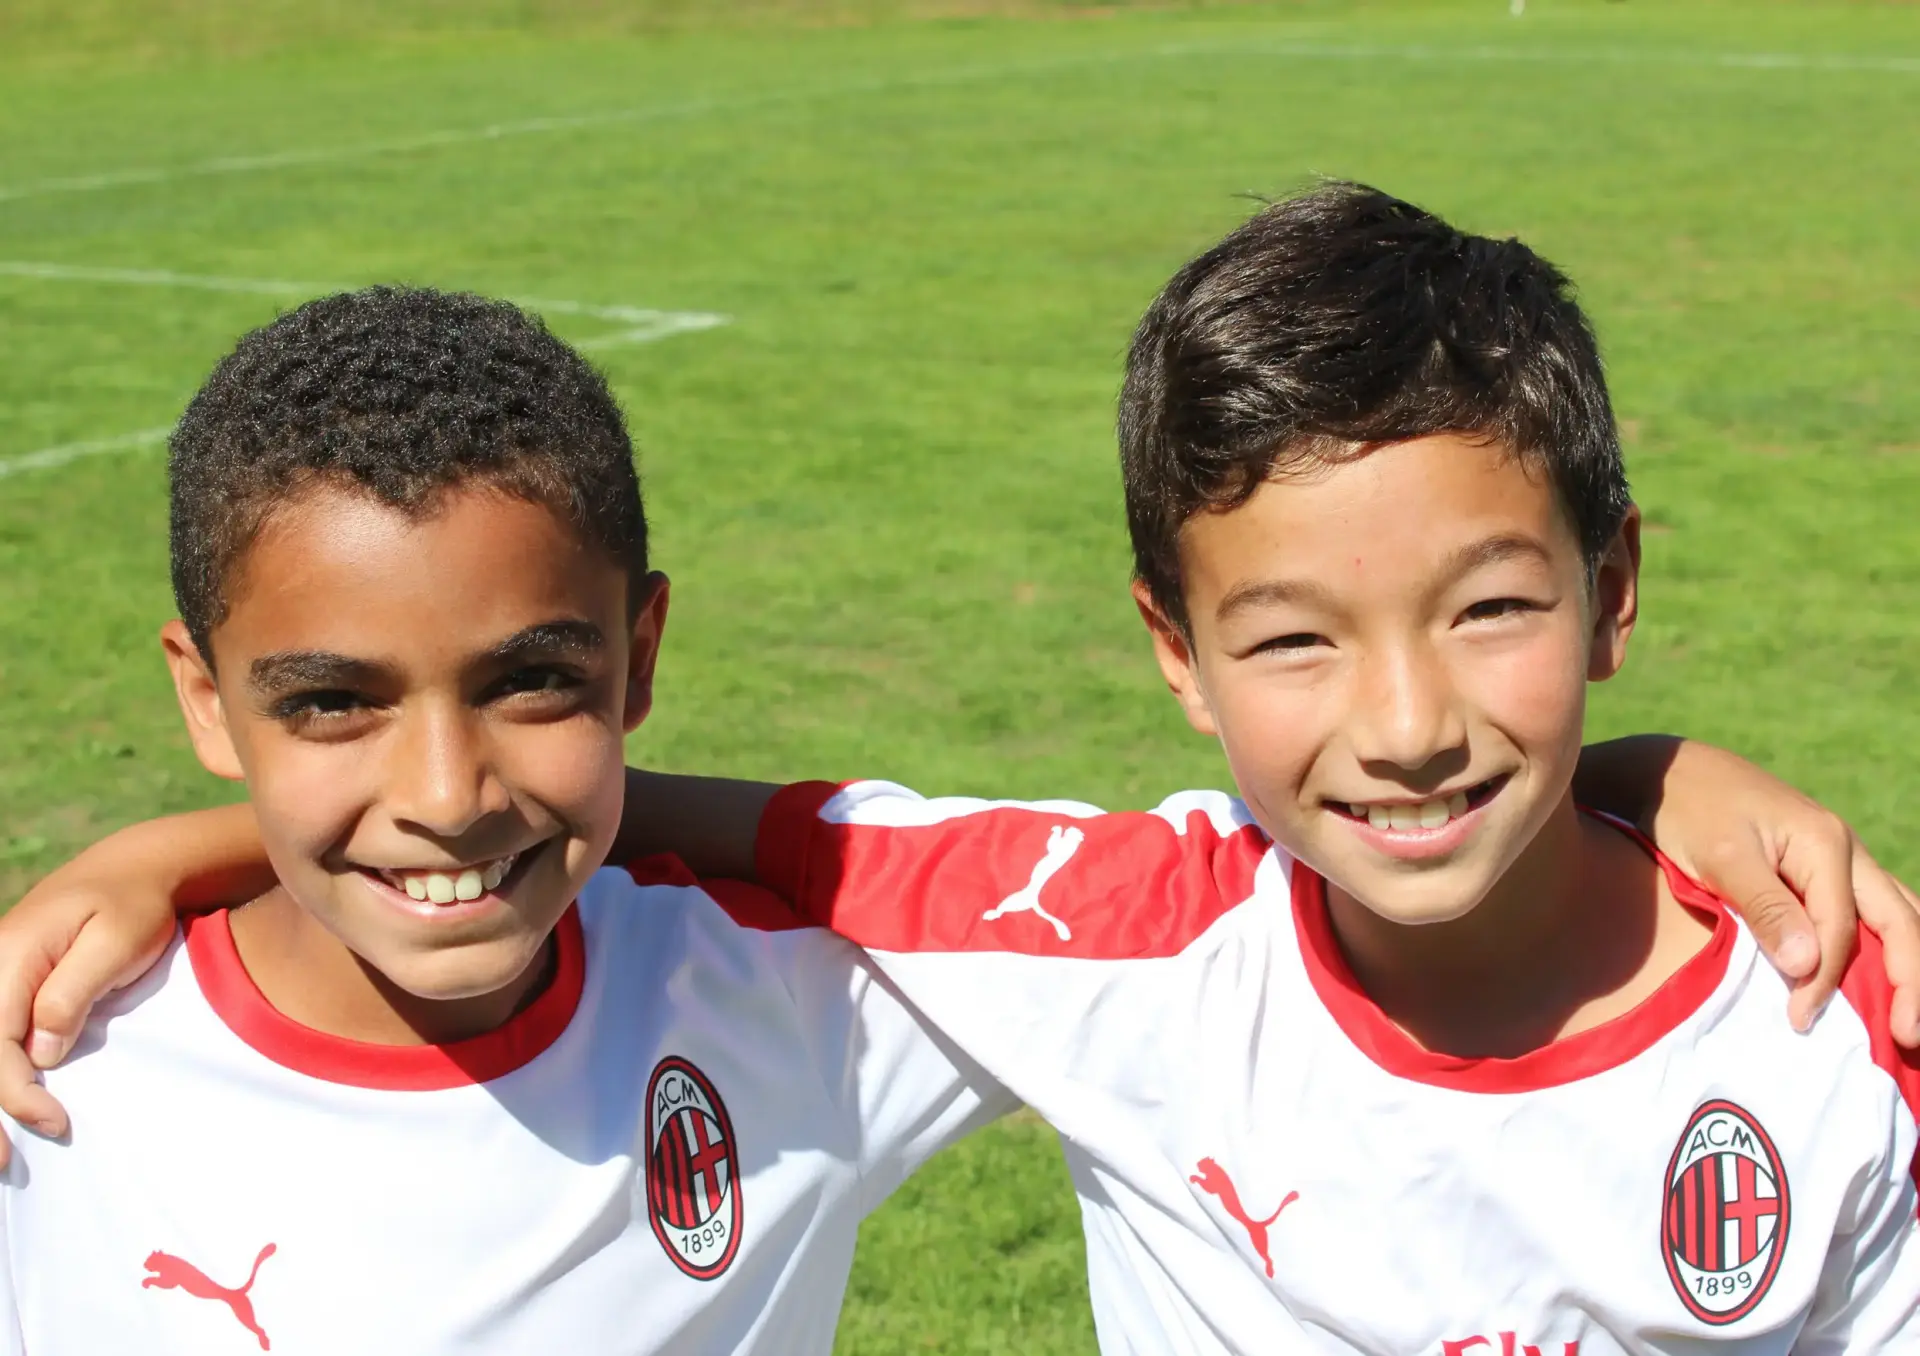 Two boys from different countries in the AC Milan Academy Junior Camp on Demand